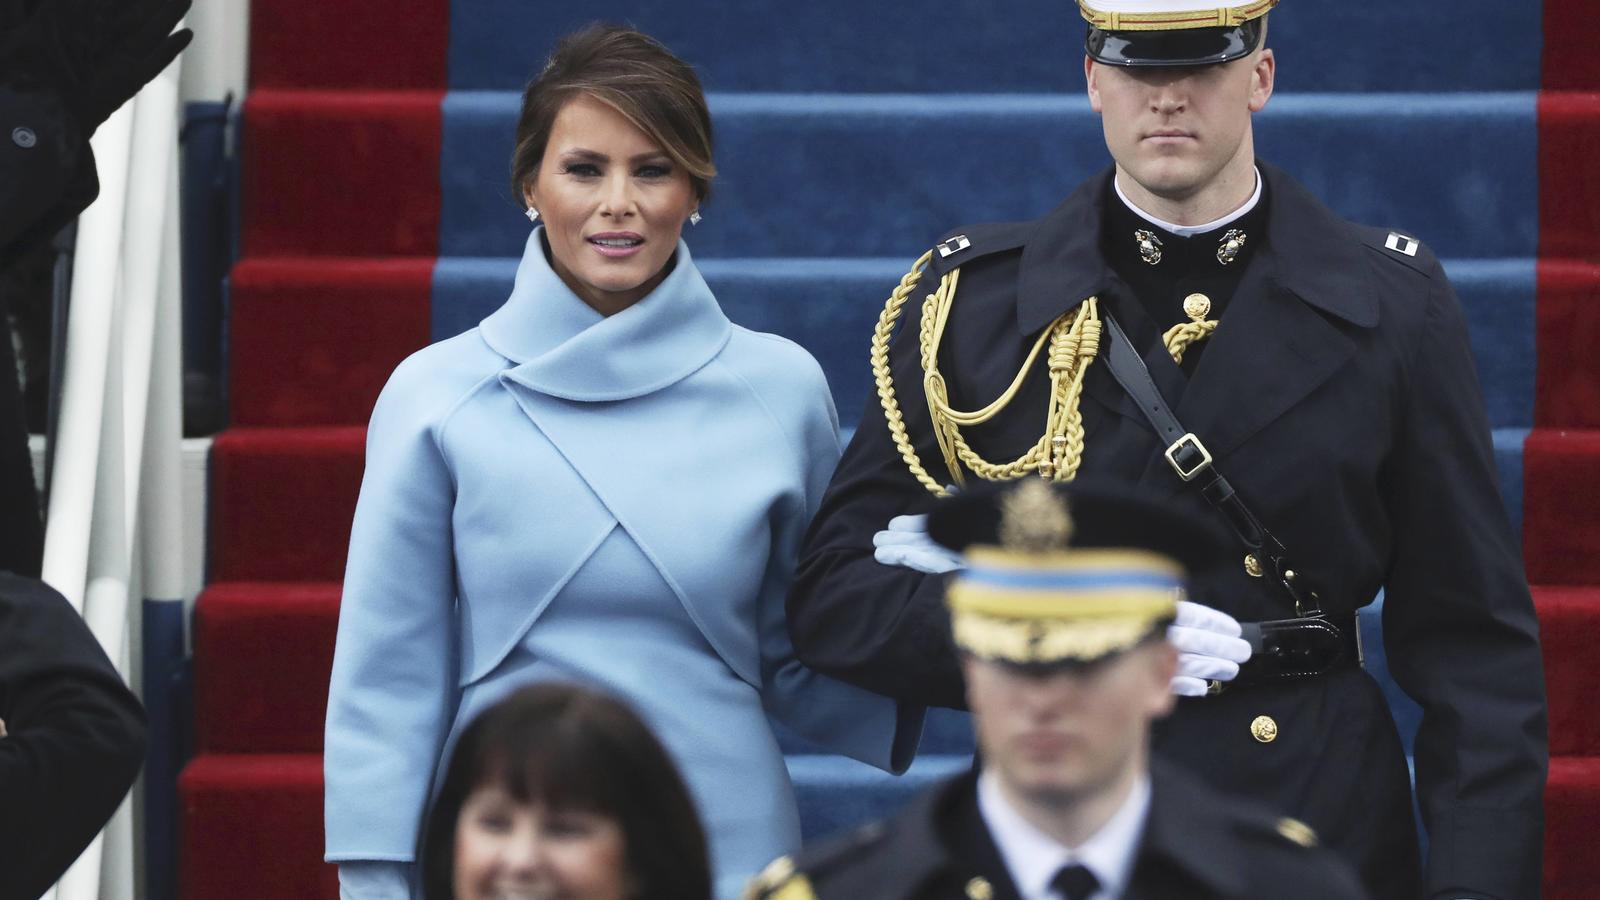 Melania Trump arrives at inauguration ceremonies swearing in Donald Trump as the 45th president of the United States on the West front of the U.S. Capitol in Washington, U.S., January 20, 2017. REUTERS/Carlos Barria 